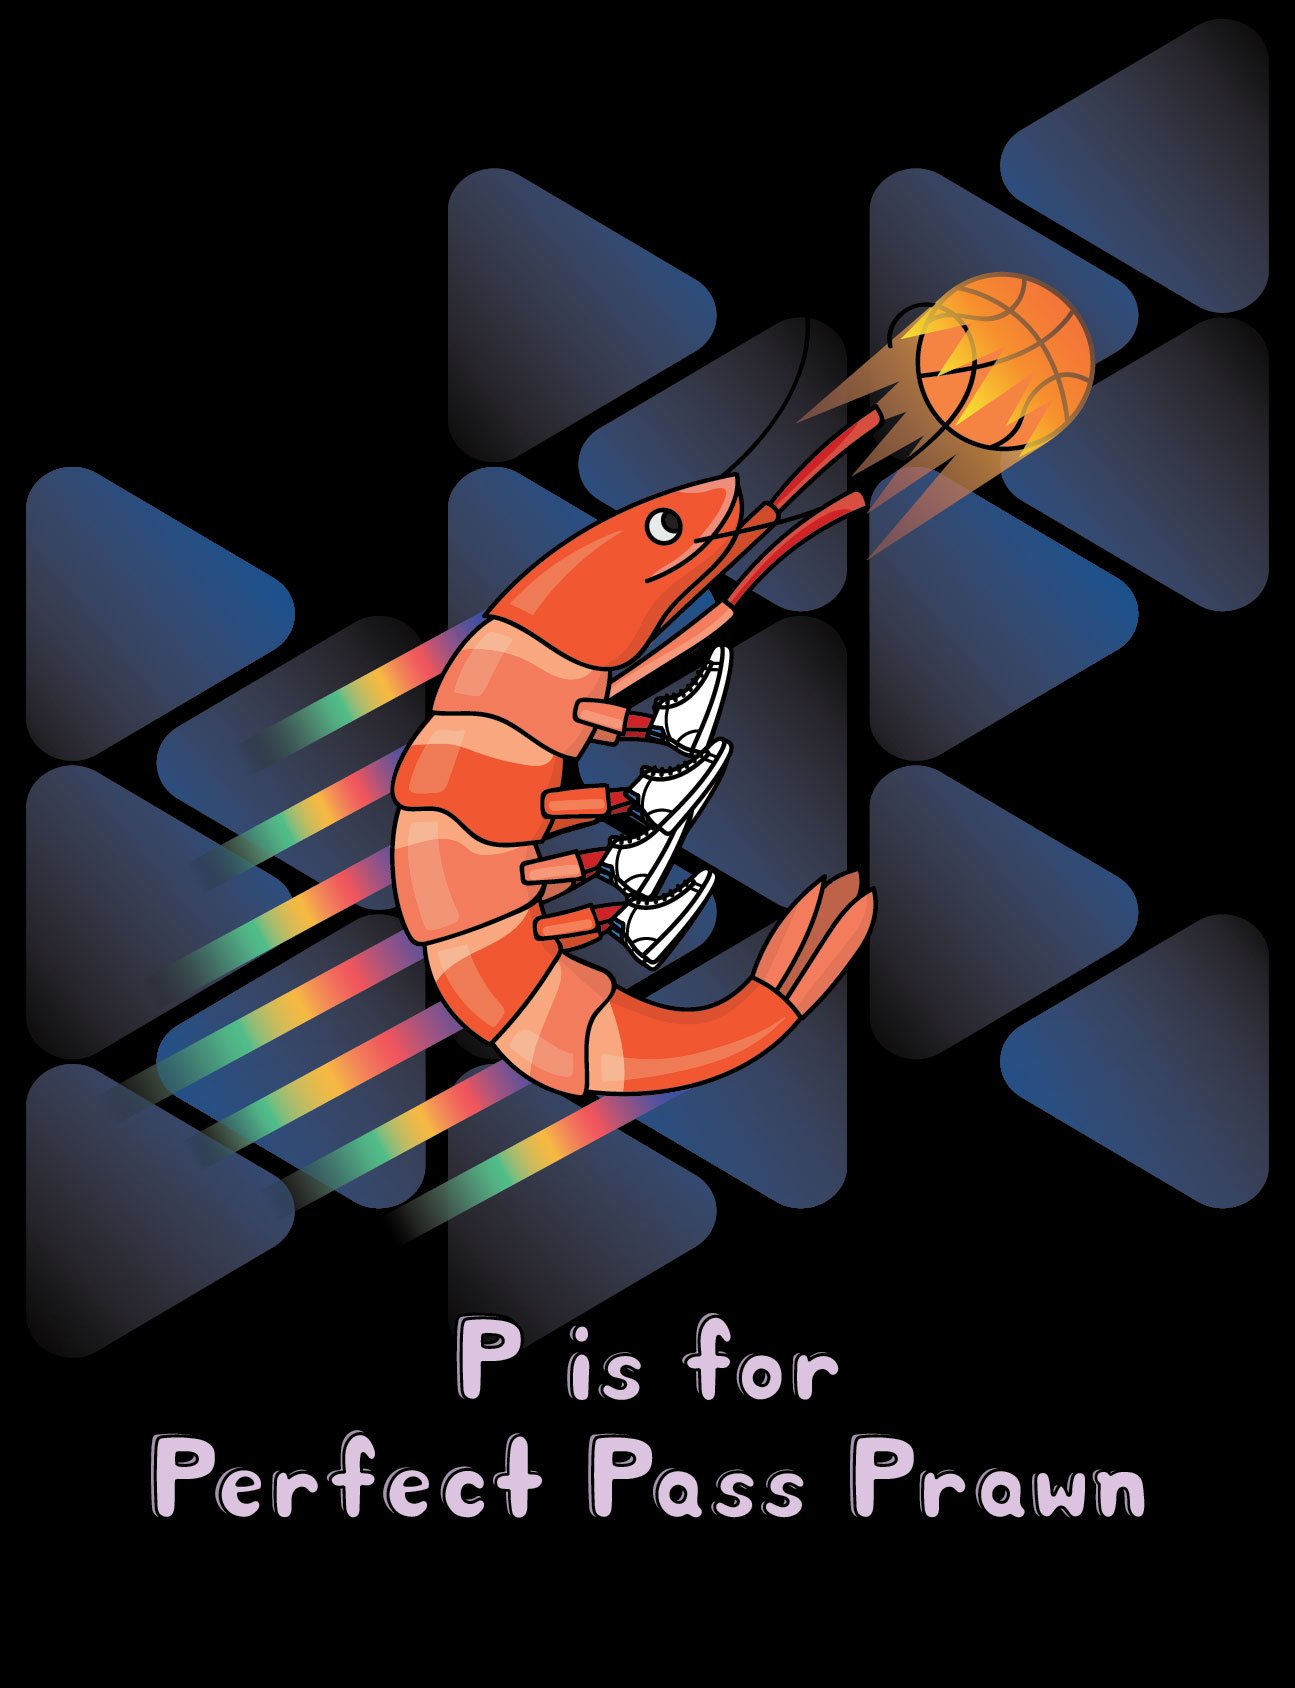 P is for Perfect Pass Prawn-01.jpg